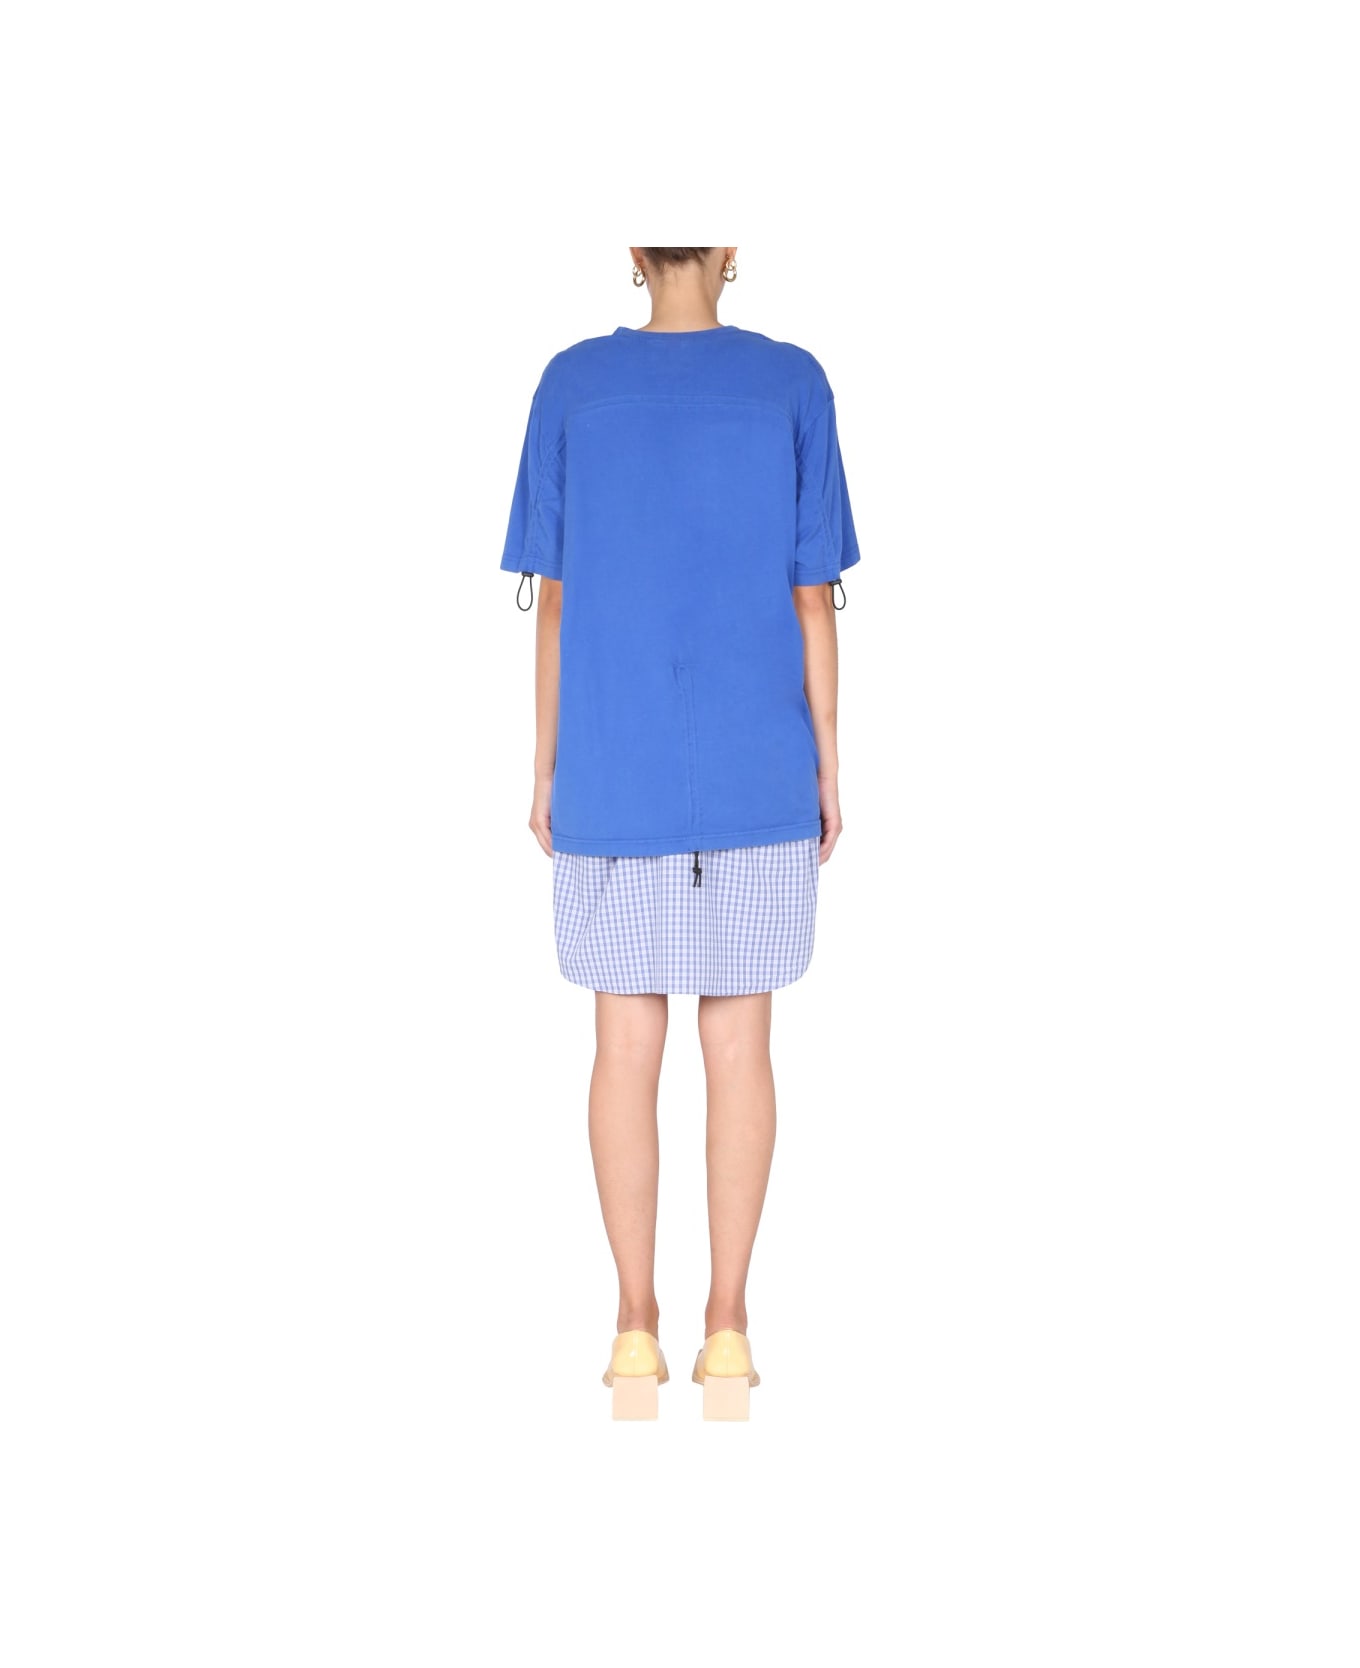 1/OFF Remade Dress - BLUE Tシャツ